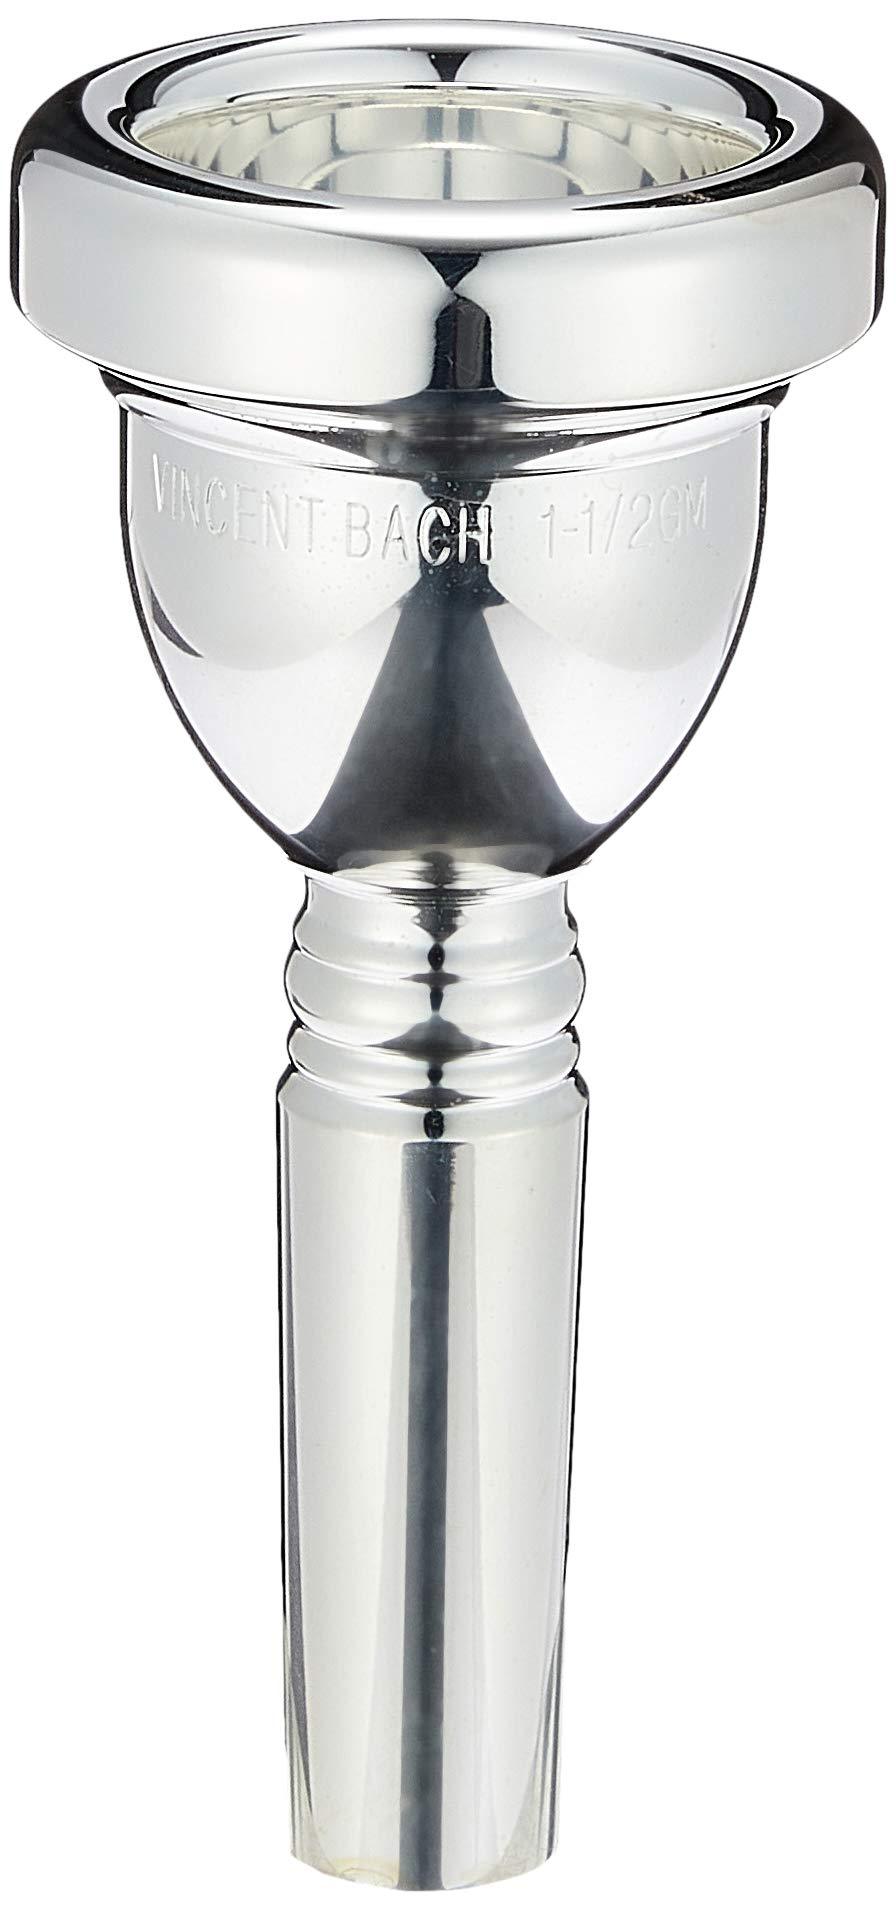 Bach 3411HGM Large Shank Tenor & Bass Trombone Mouthpiece, Silver Plated, 1-1/2 GM Cup Deep